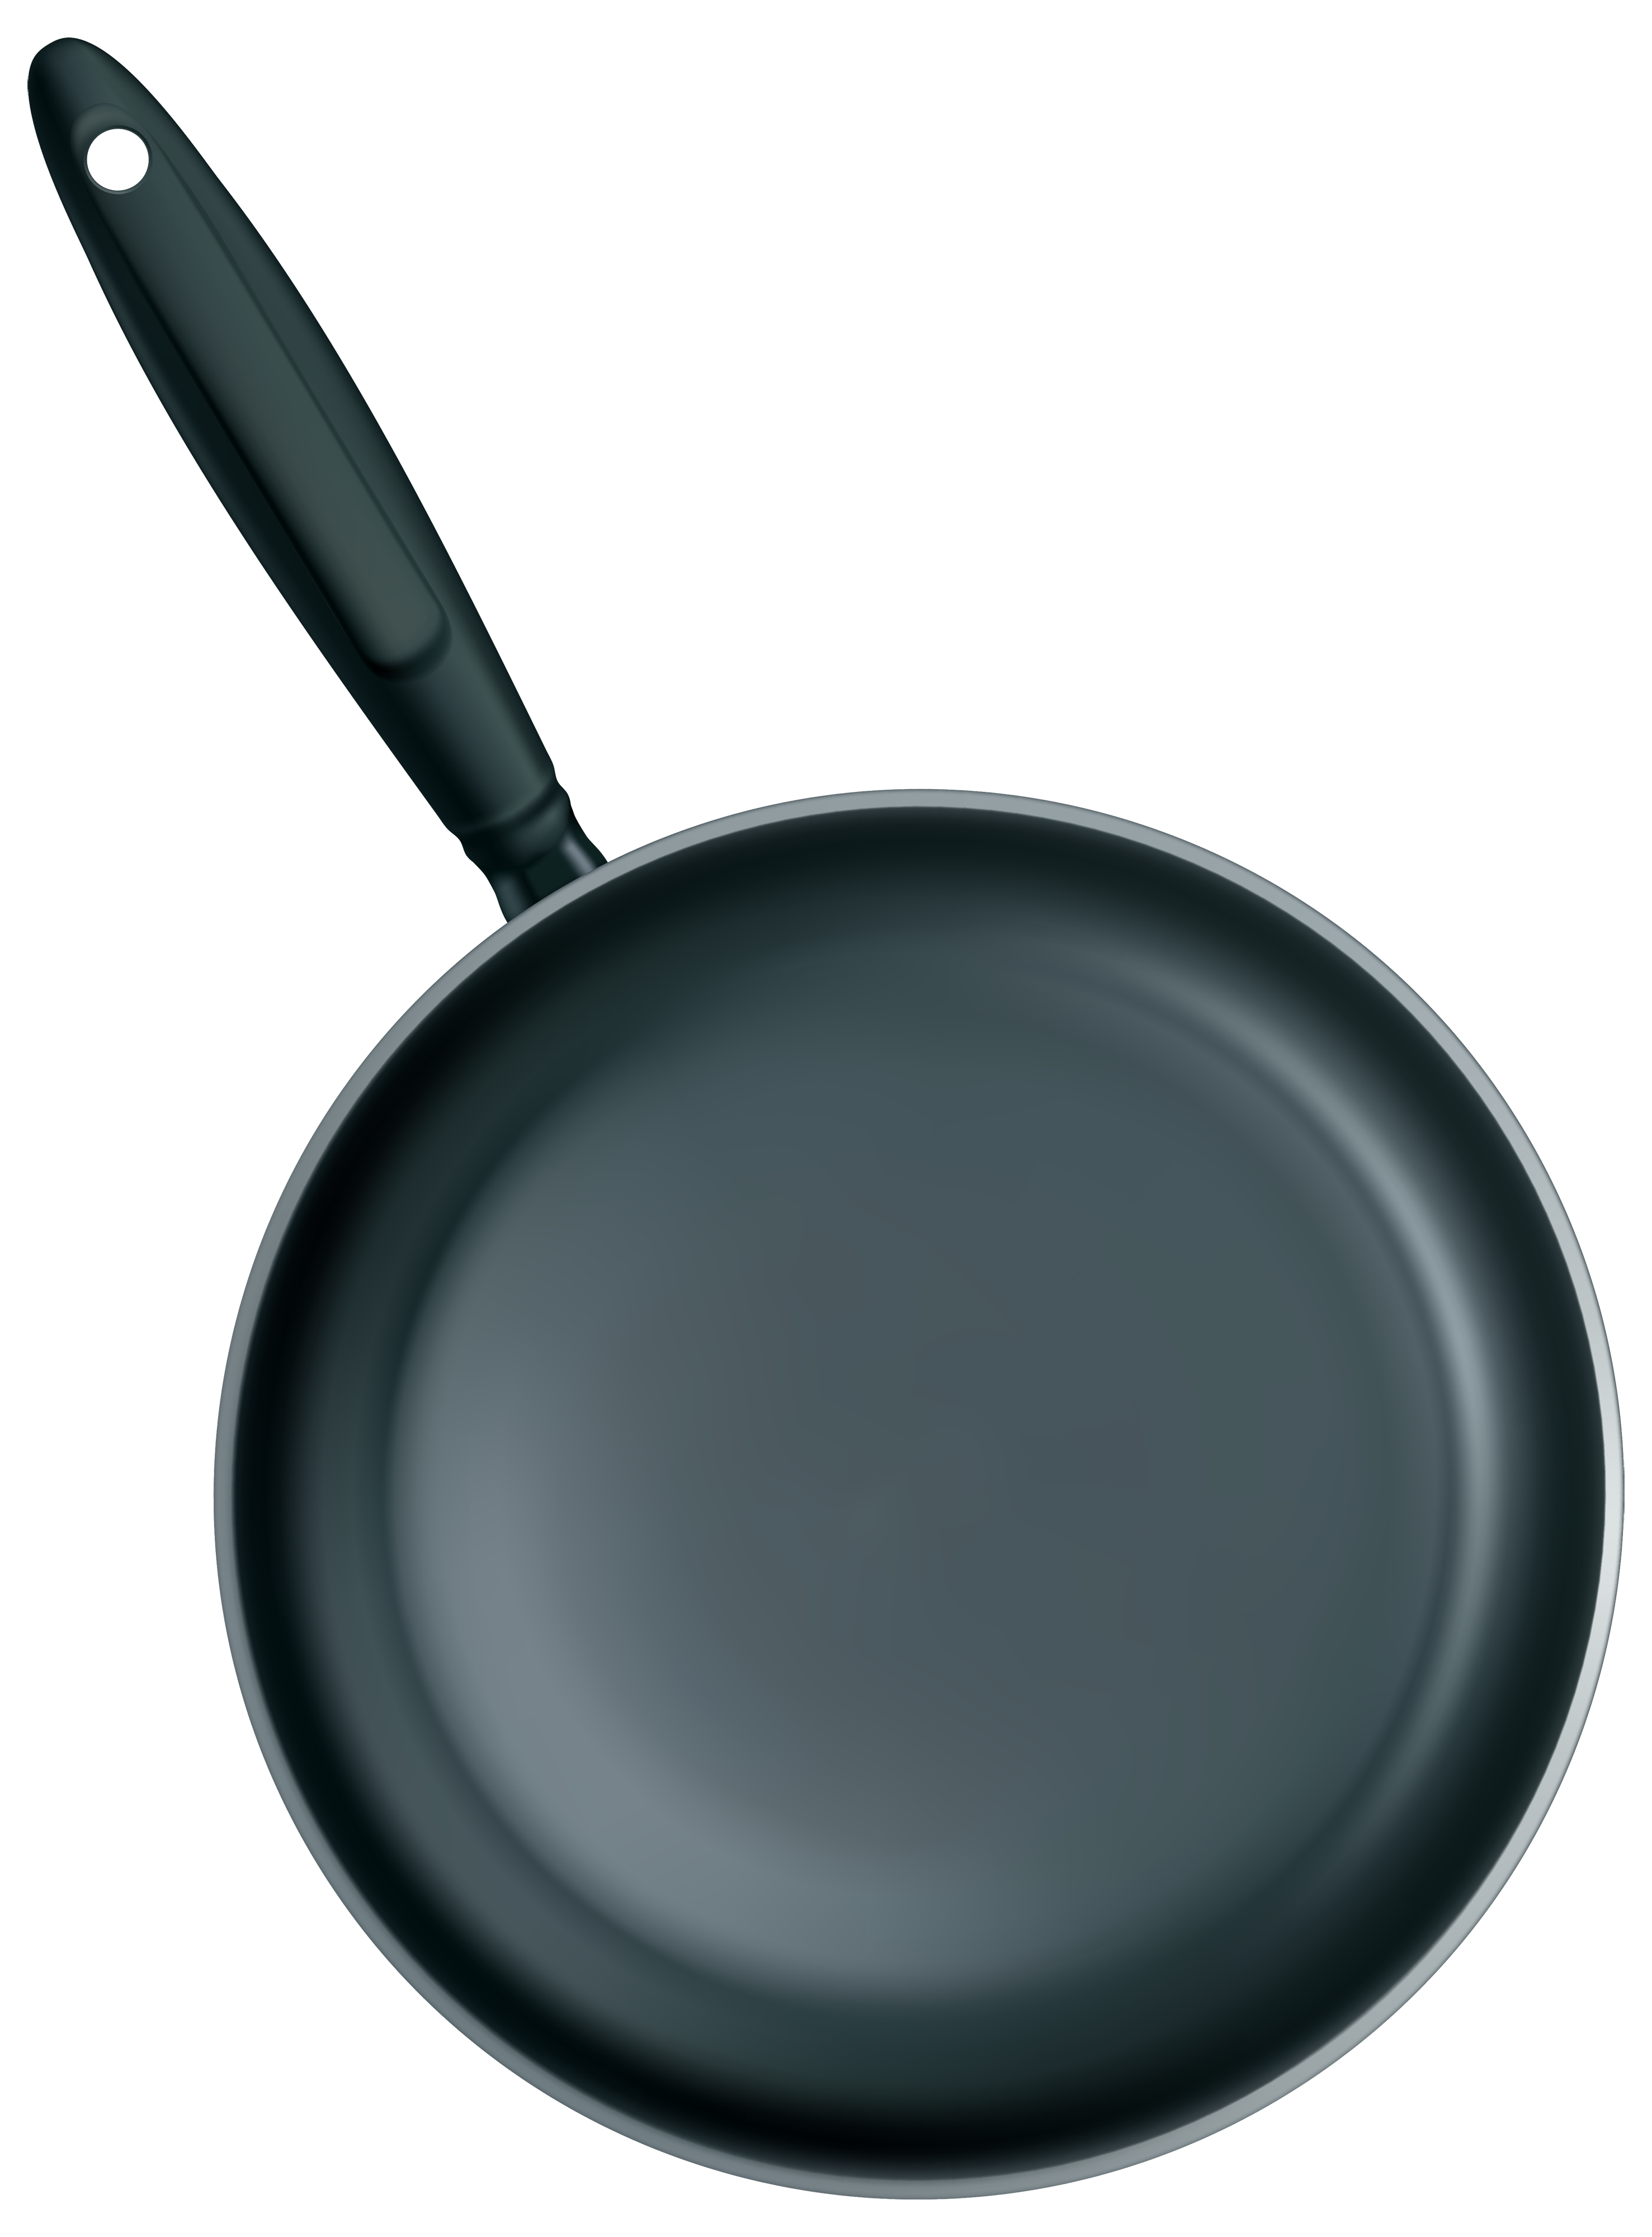 cooking pan clipart - photo #27